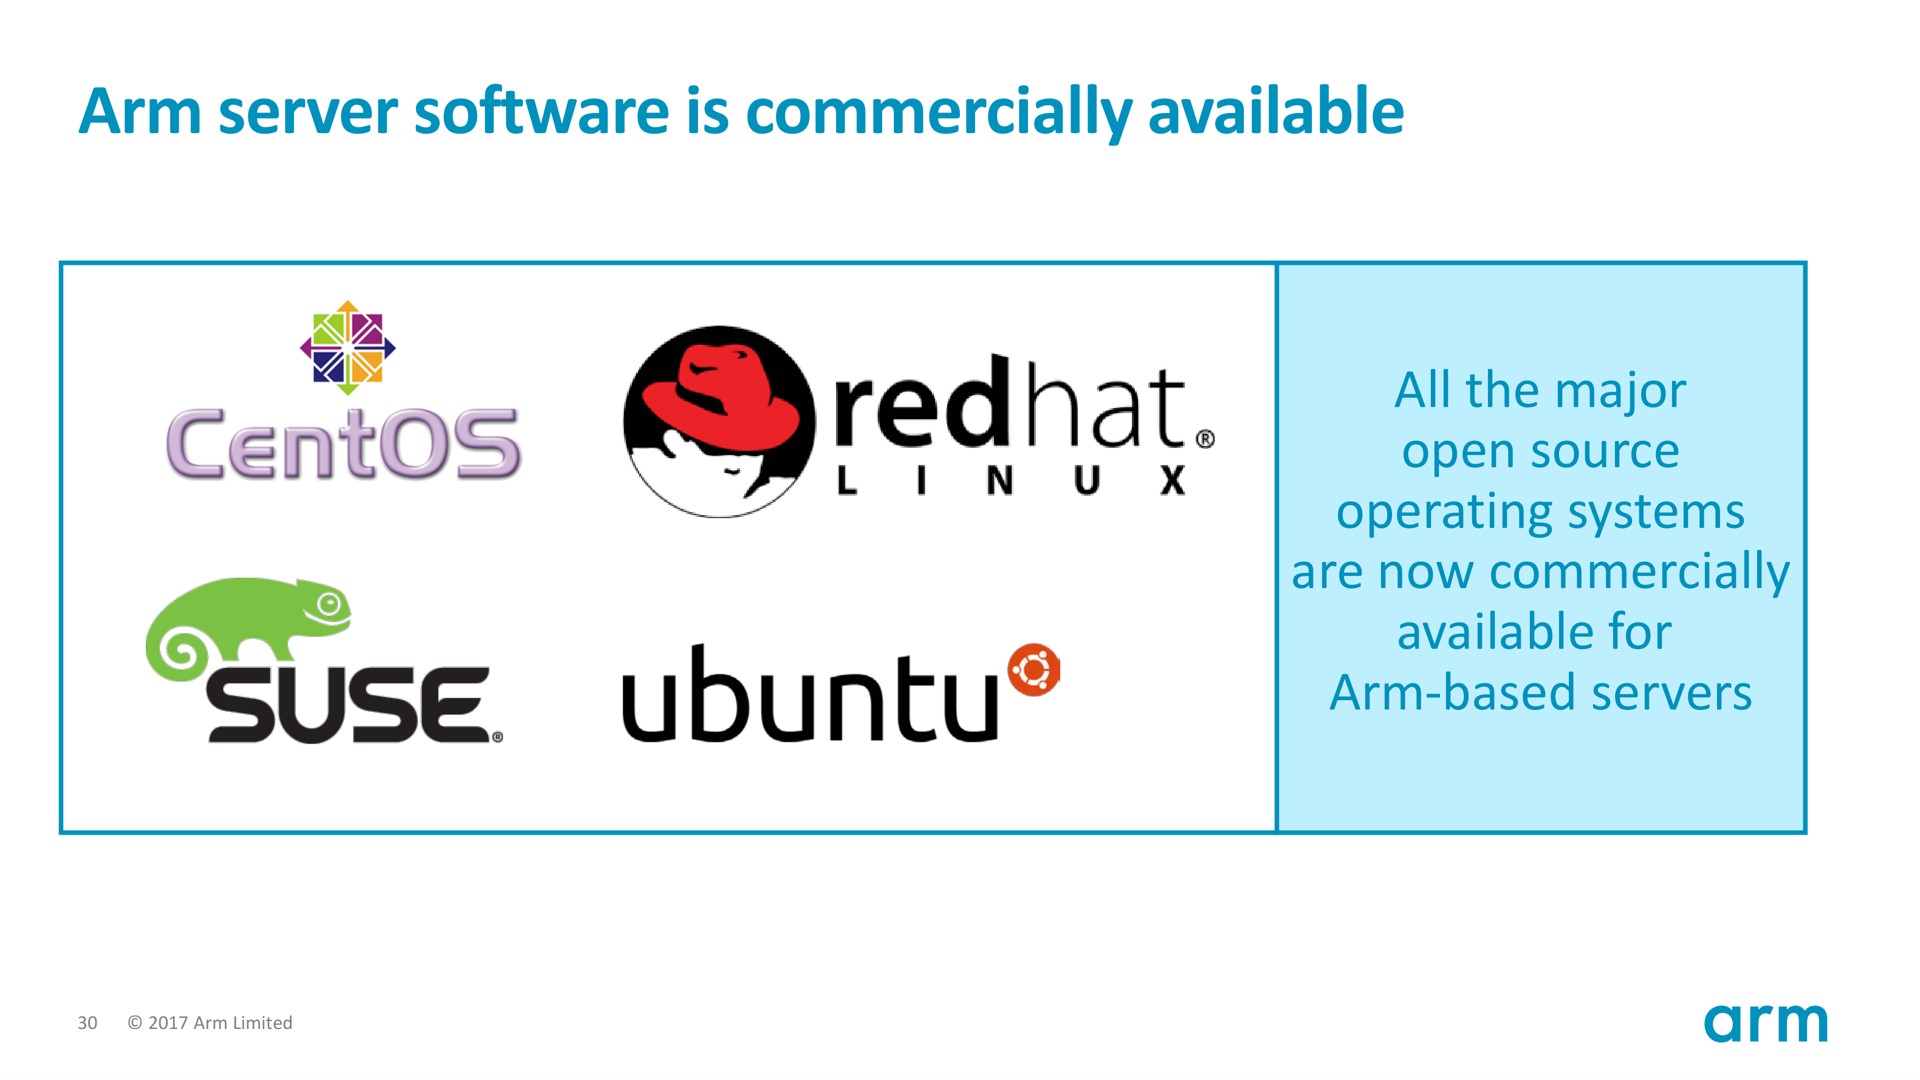 arm server is commercially available use arm based servers | SoftBank